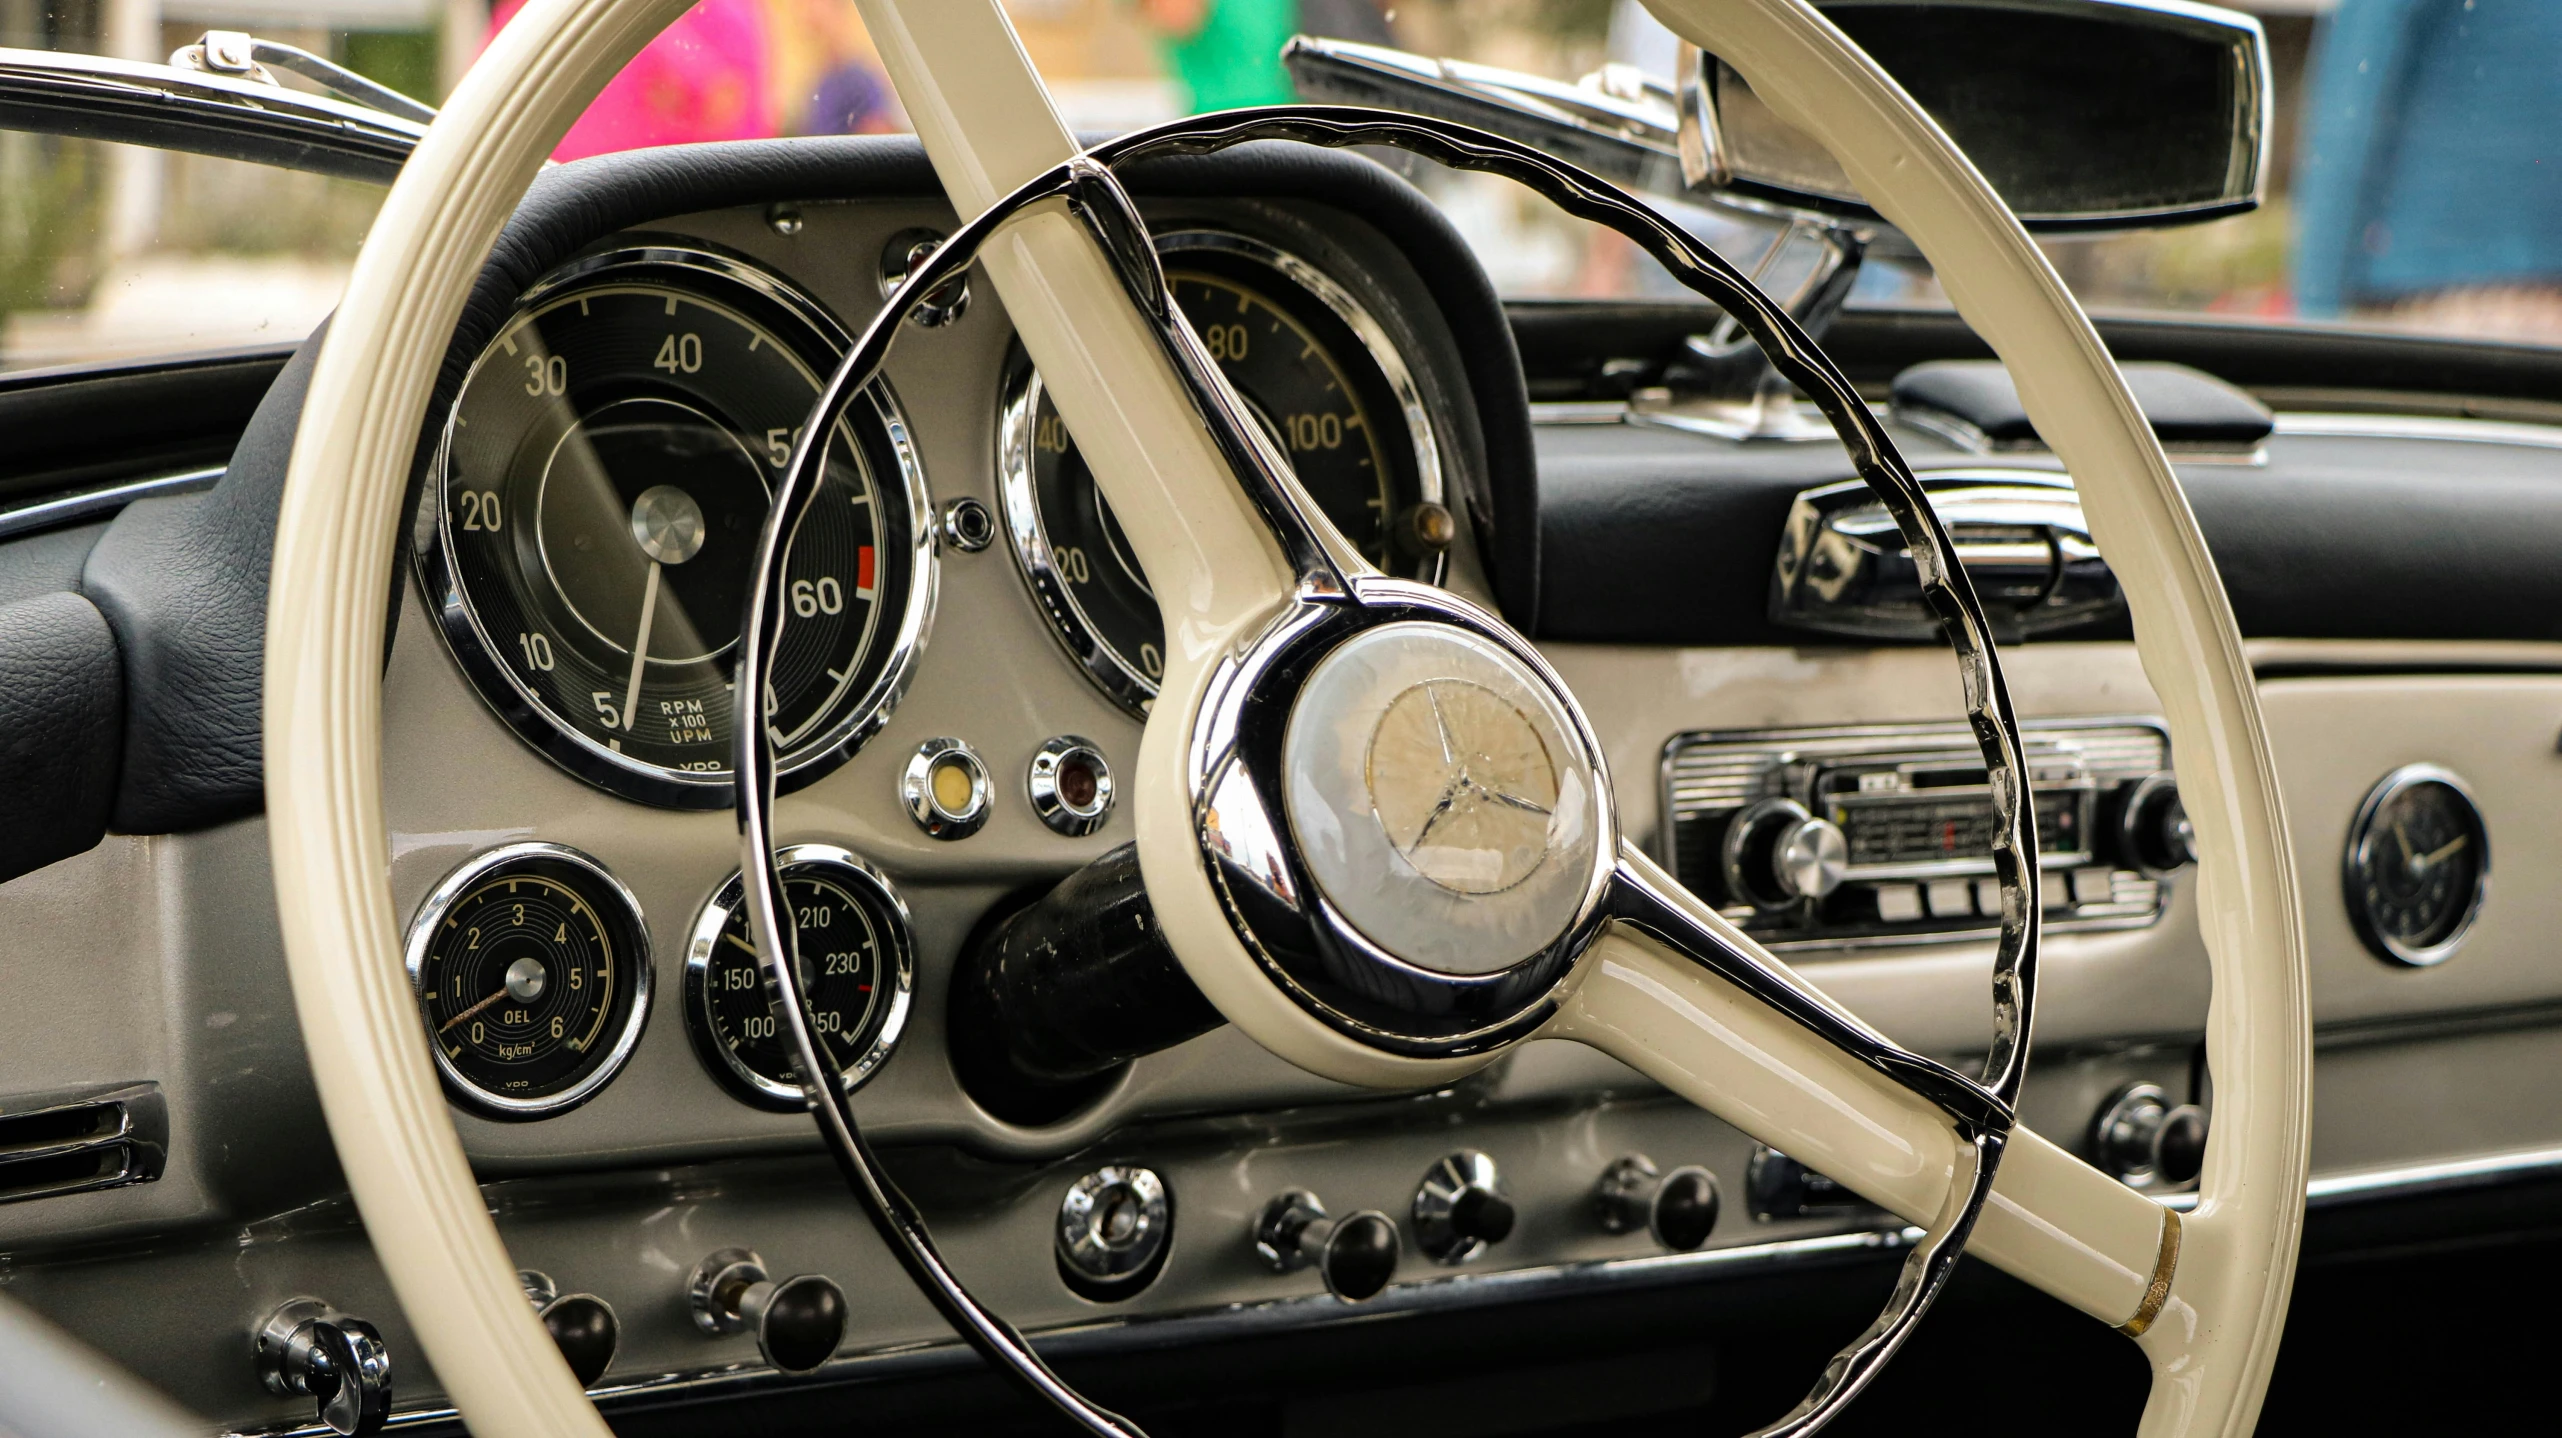 the dashboard of a vintage car with dash gauges and steering wheel